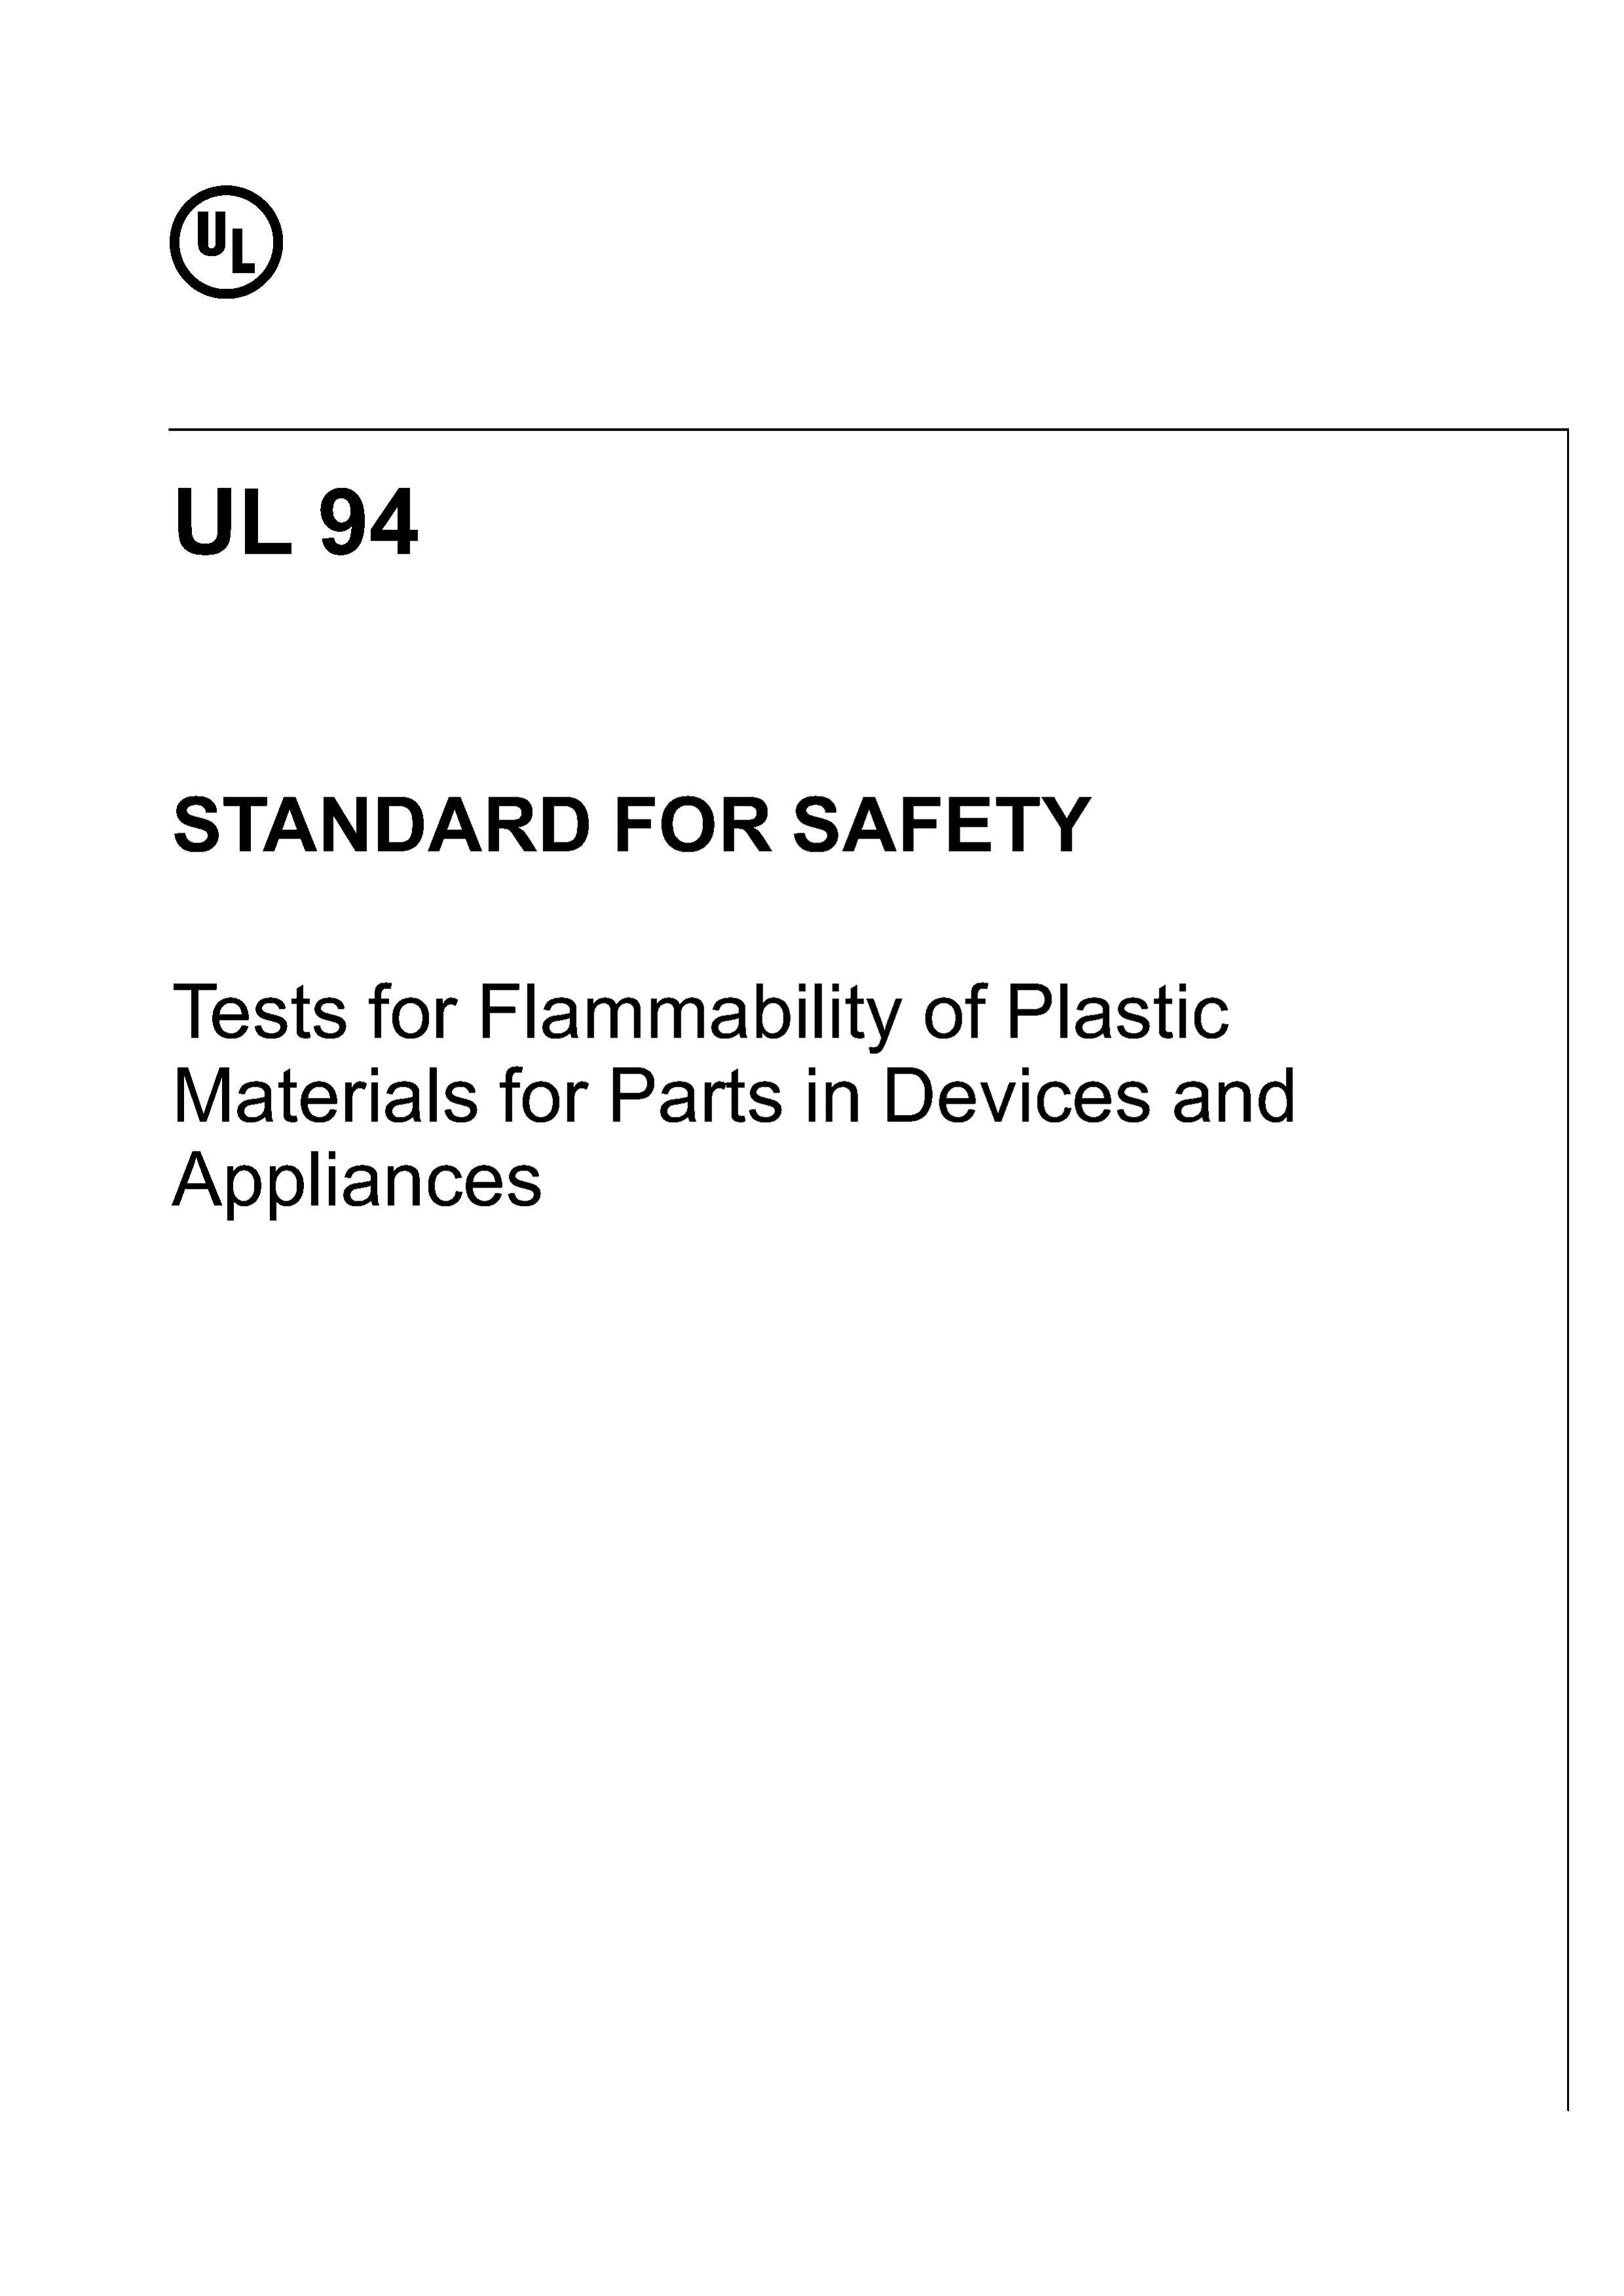 UL 94-2023 Flammability of Plastic Materials for Parts in Devices and Appliances.pdf1ҳ